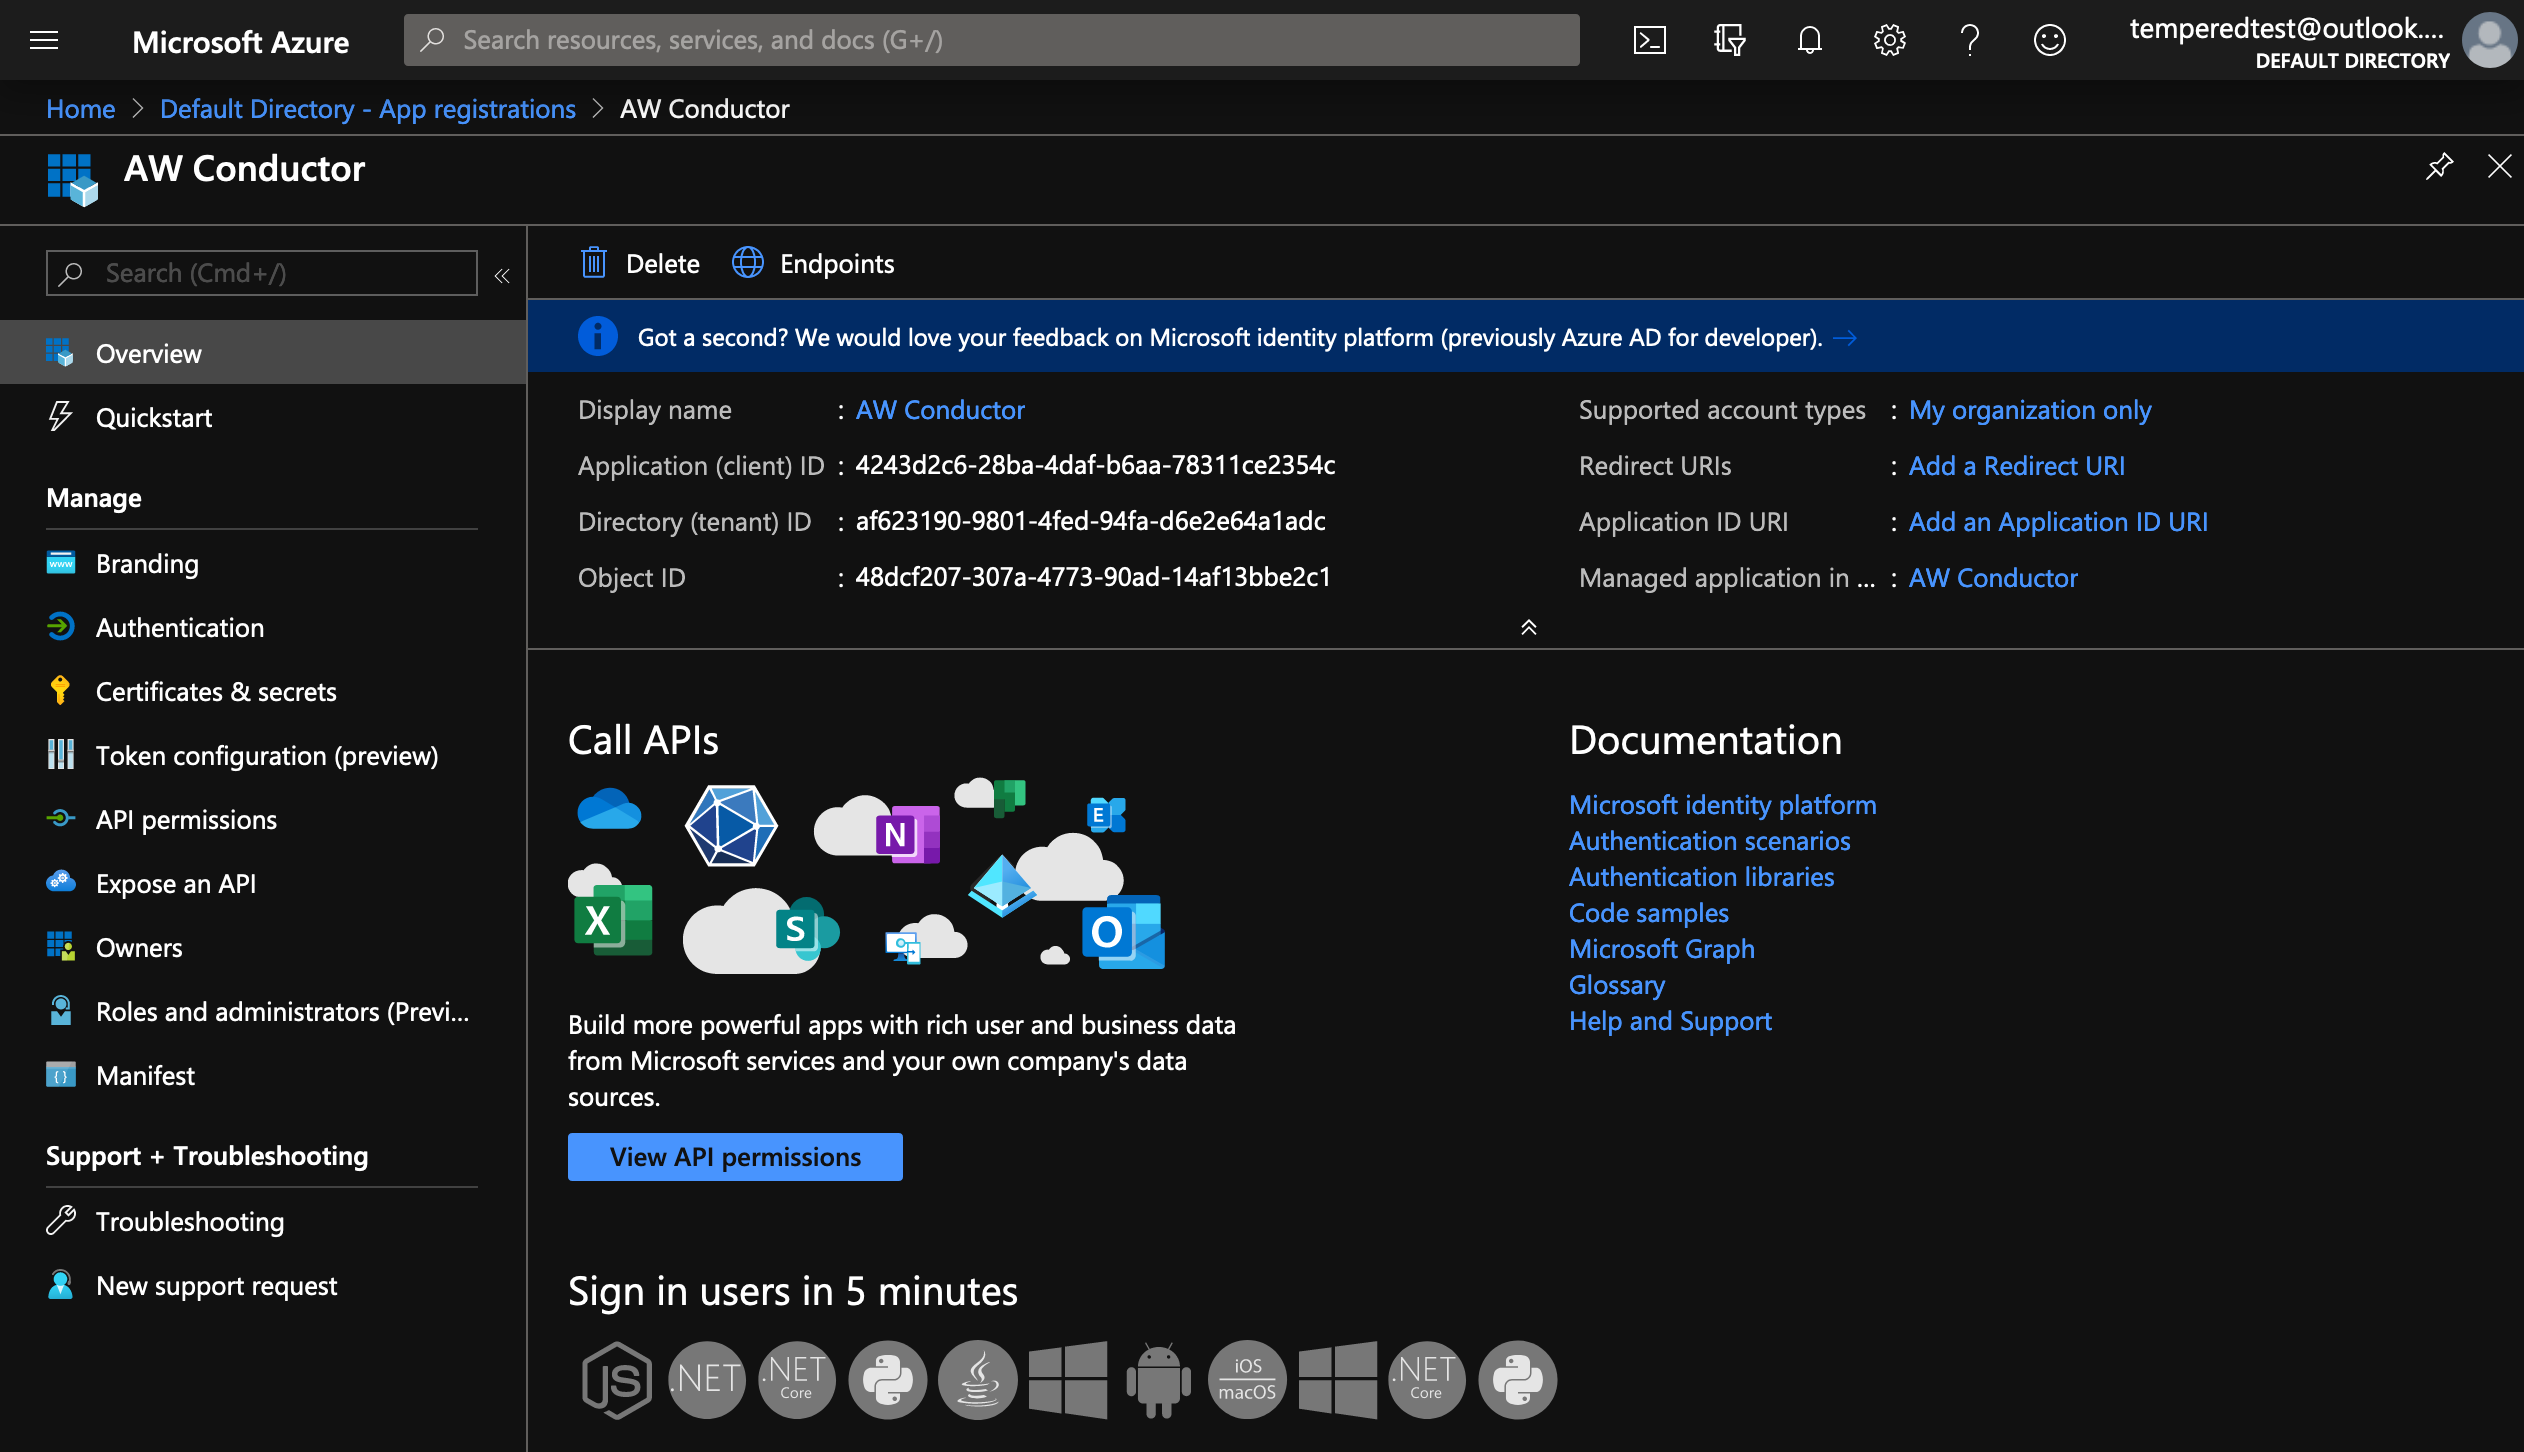 Azure Application Overview page showing TenantID